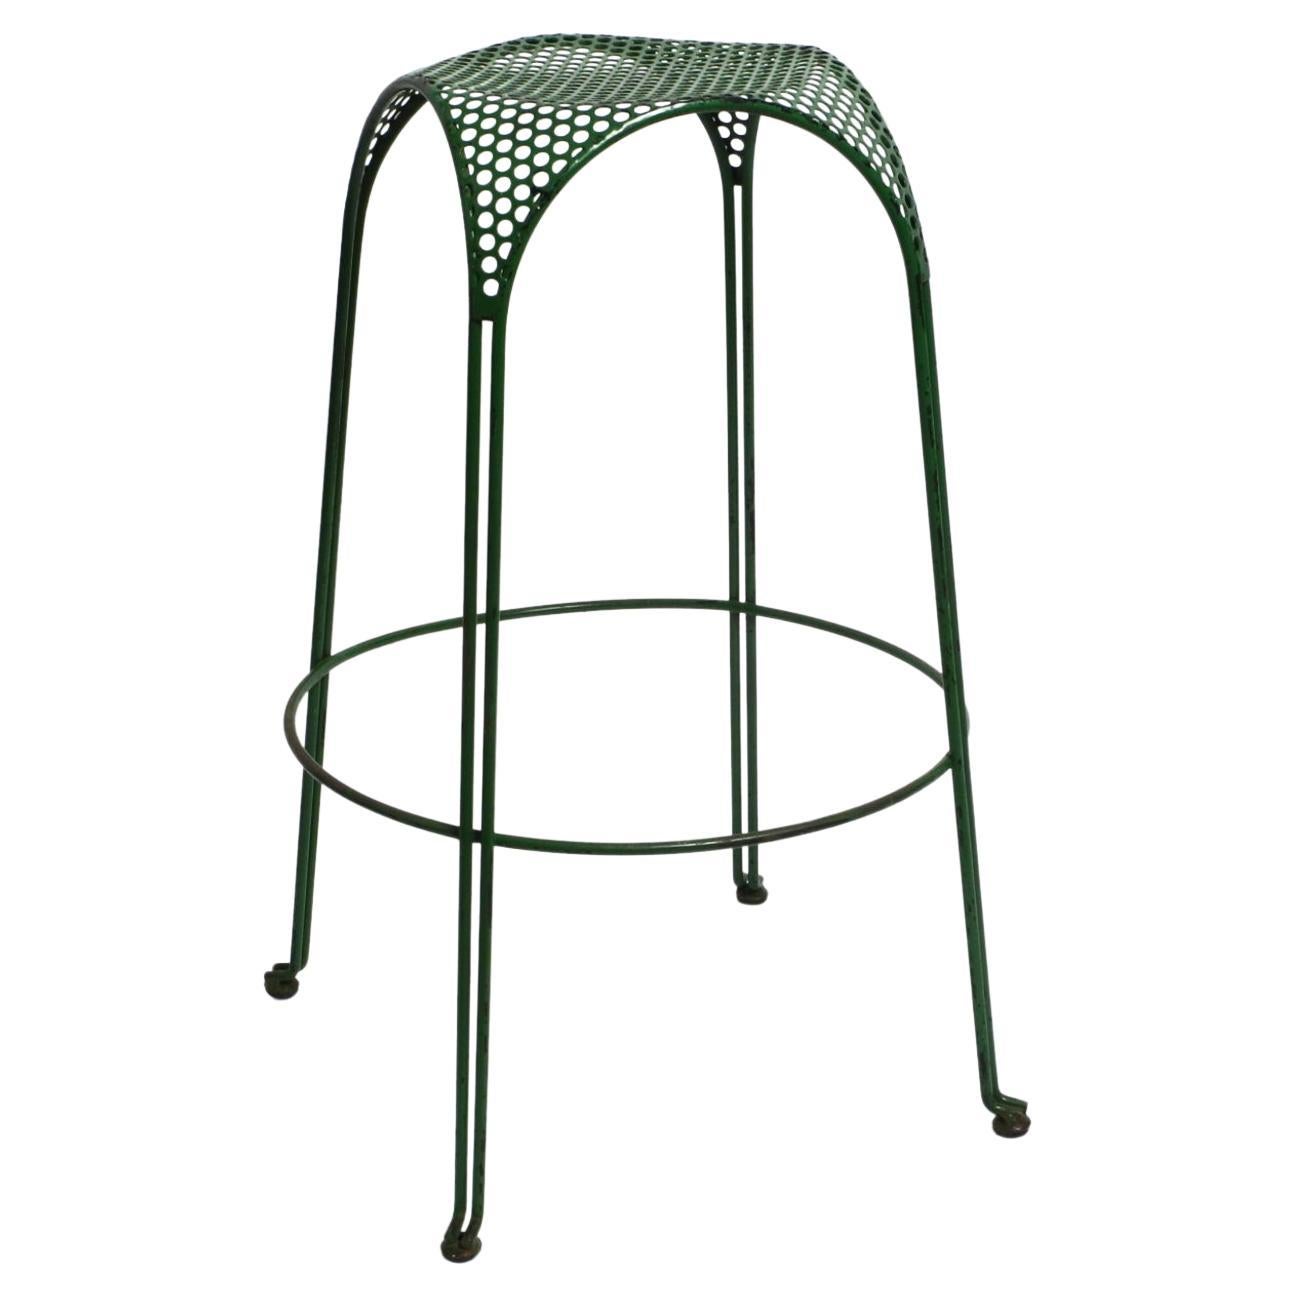 Italian 1960s bar stool made of green painted metal with perforated metal seat For Sale